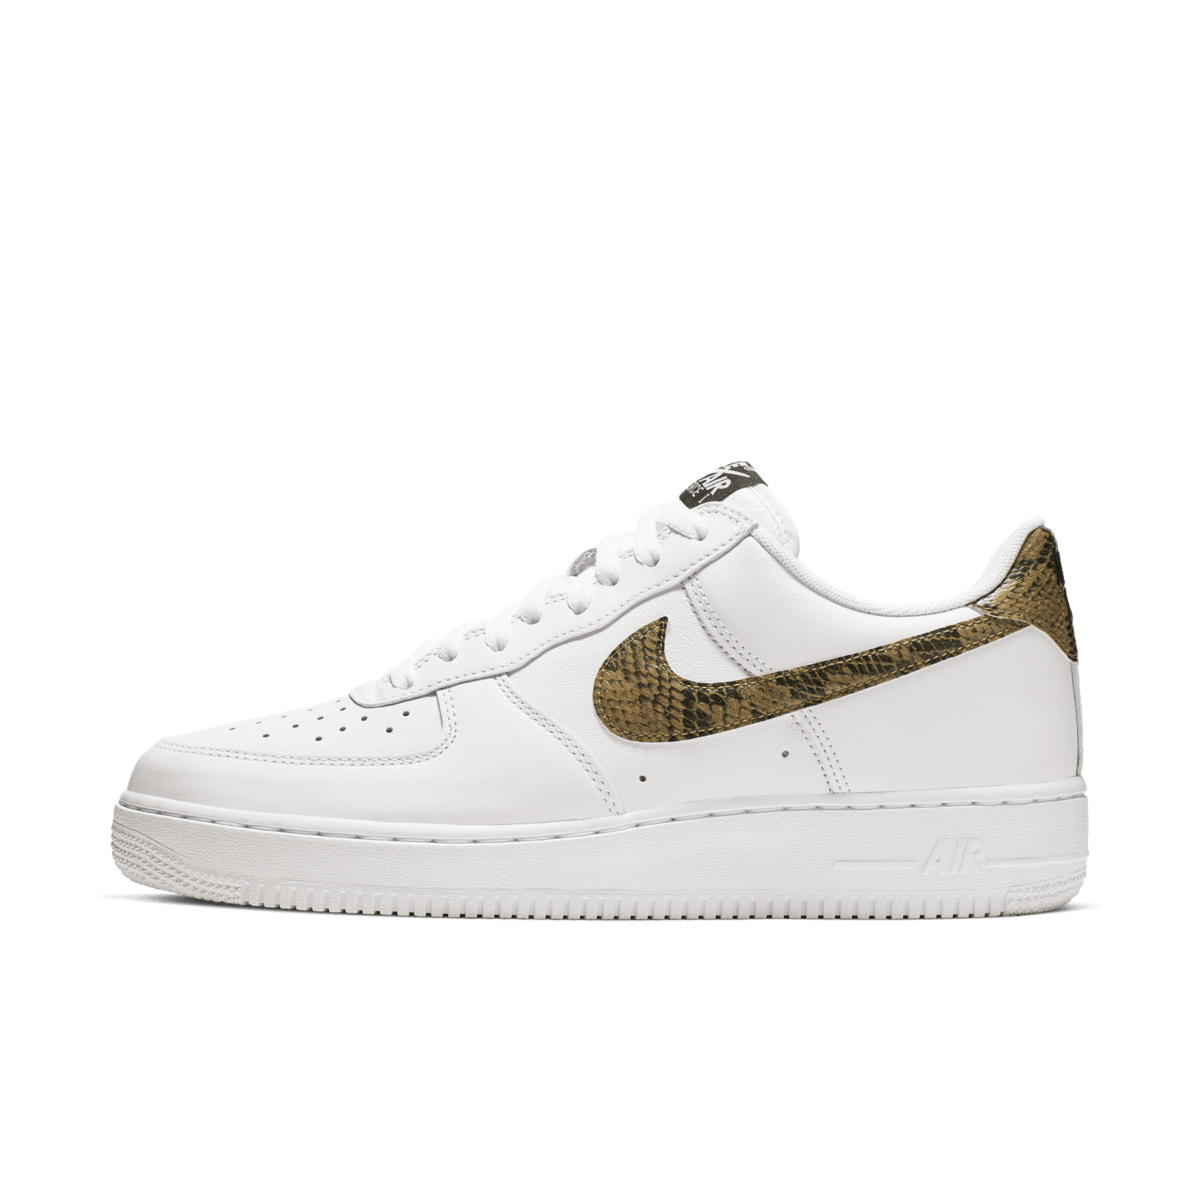 Nike Air Force 1 Low PRM QS 'Snake' AO1635-100